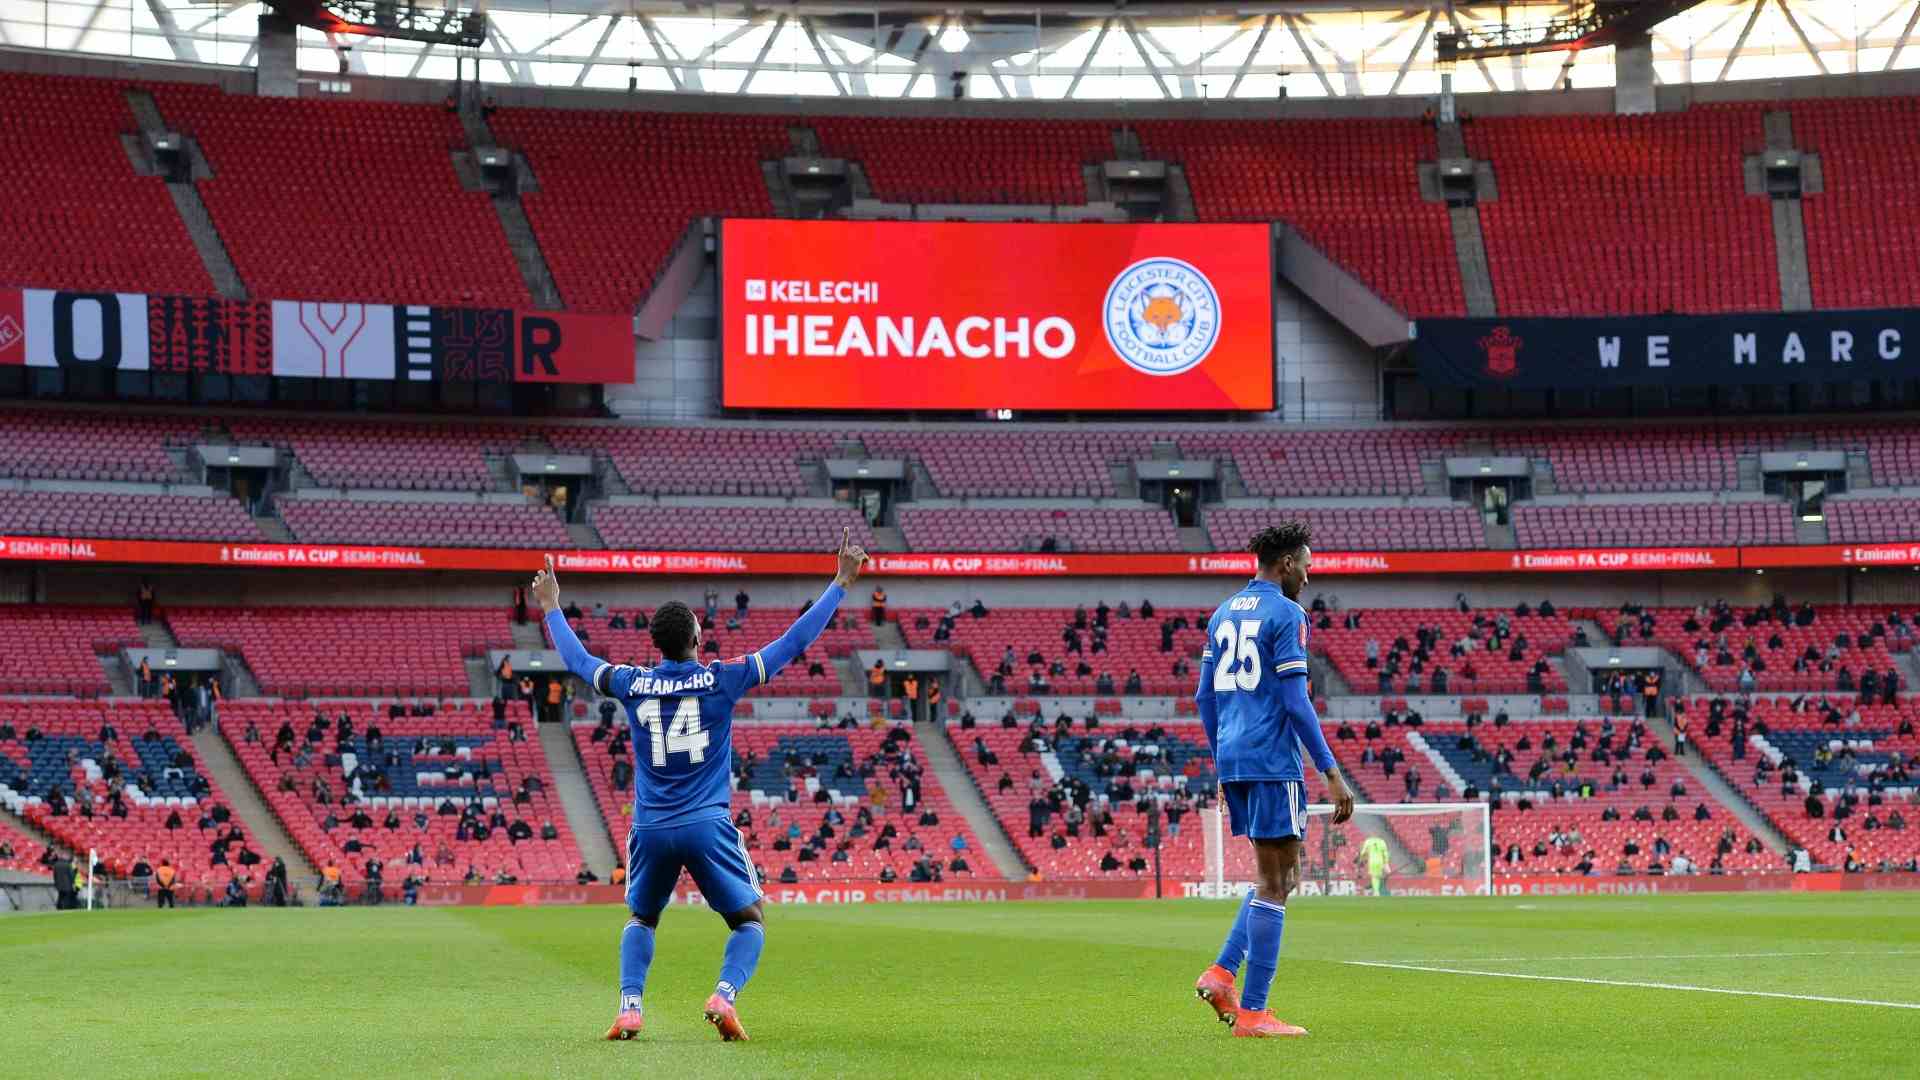 Kelechi Iheanacho scored the only goal of the match to send Leicester City to the FA Cup 2021 final; photo credit:twitter/@LCFC